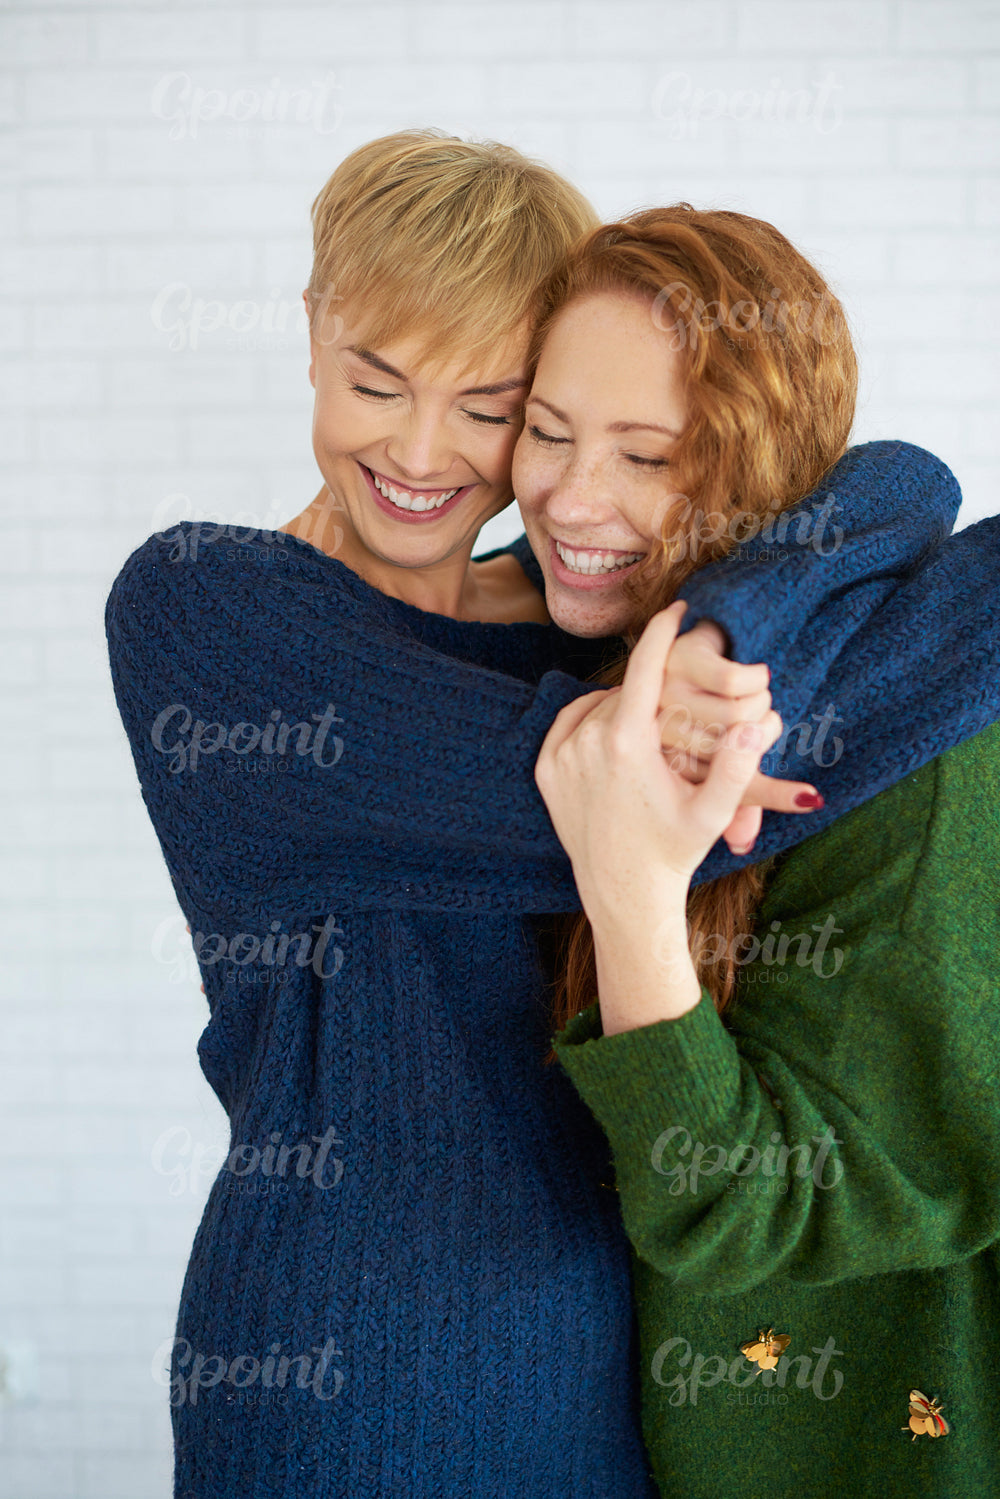 Two girls embracing each other